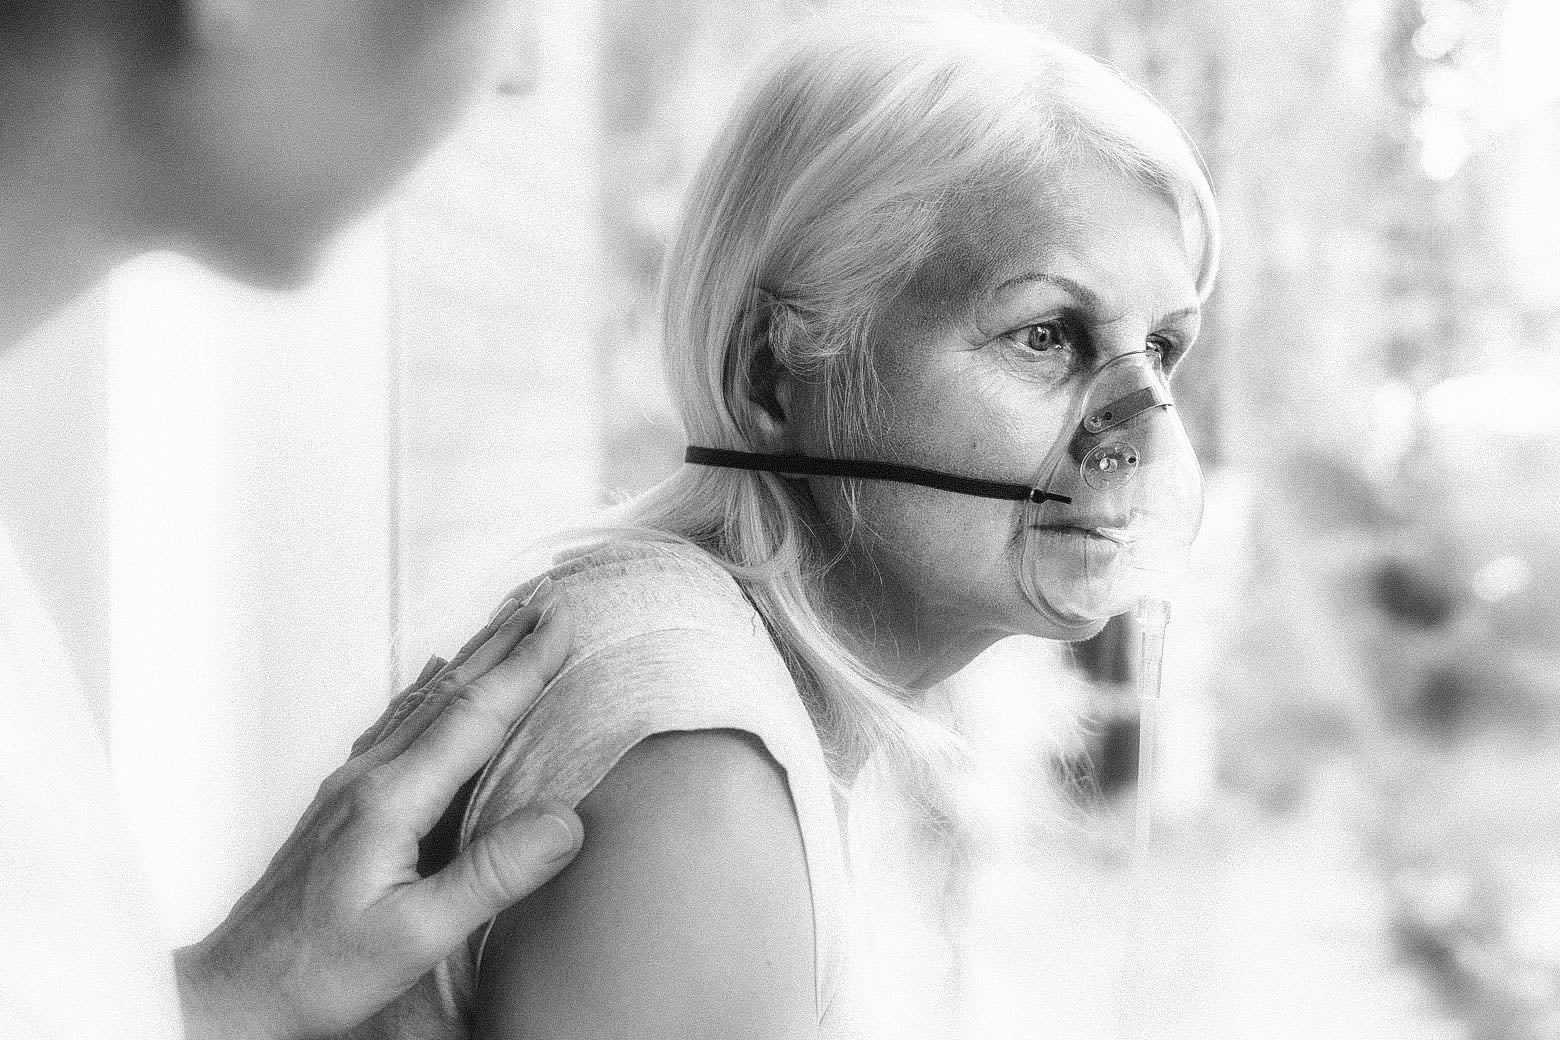 An older woman sits with an oxygen mask on her face while someone mostly out of frame puts a hand on her back.